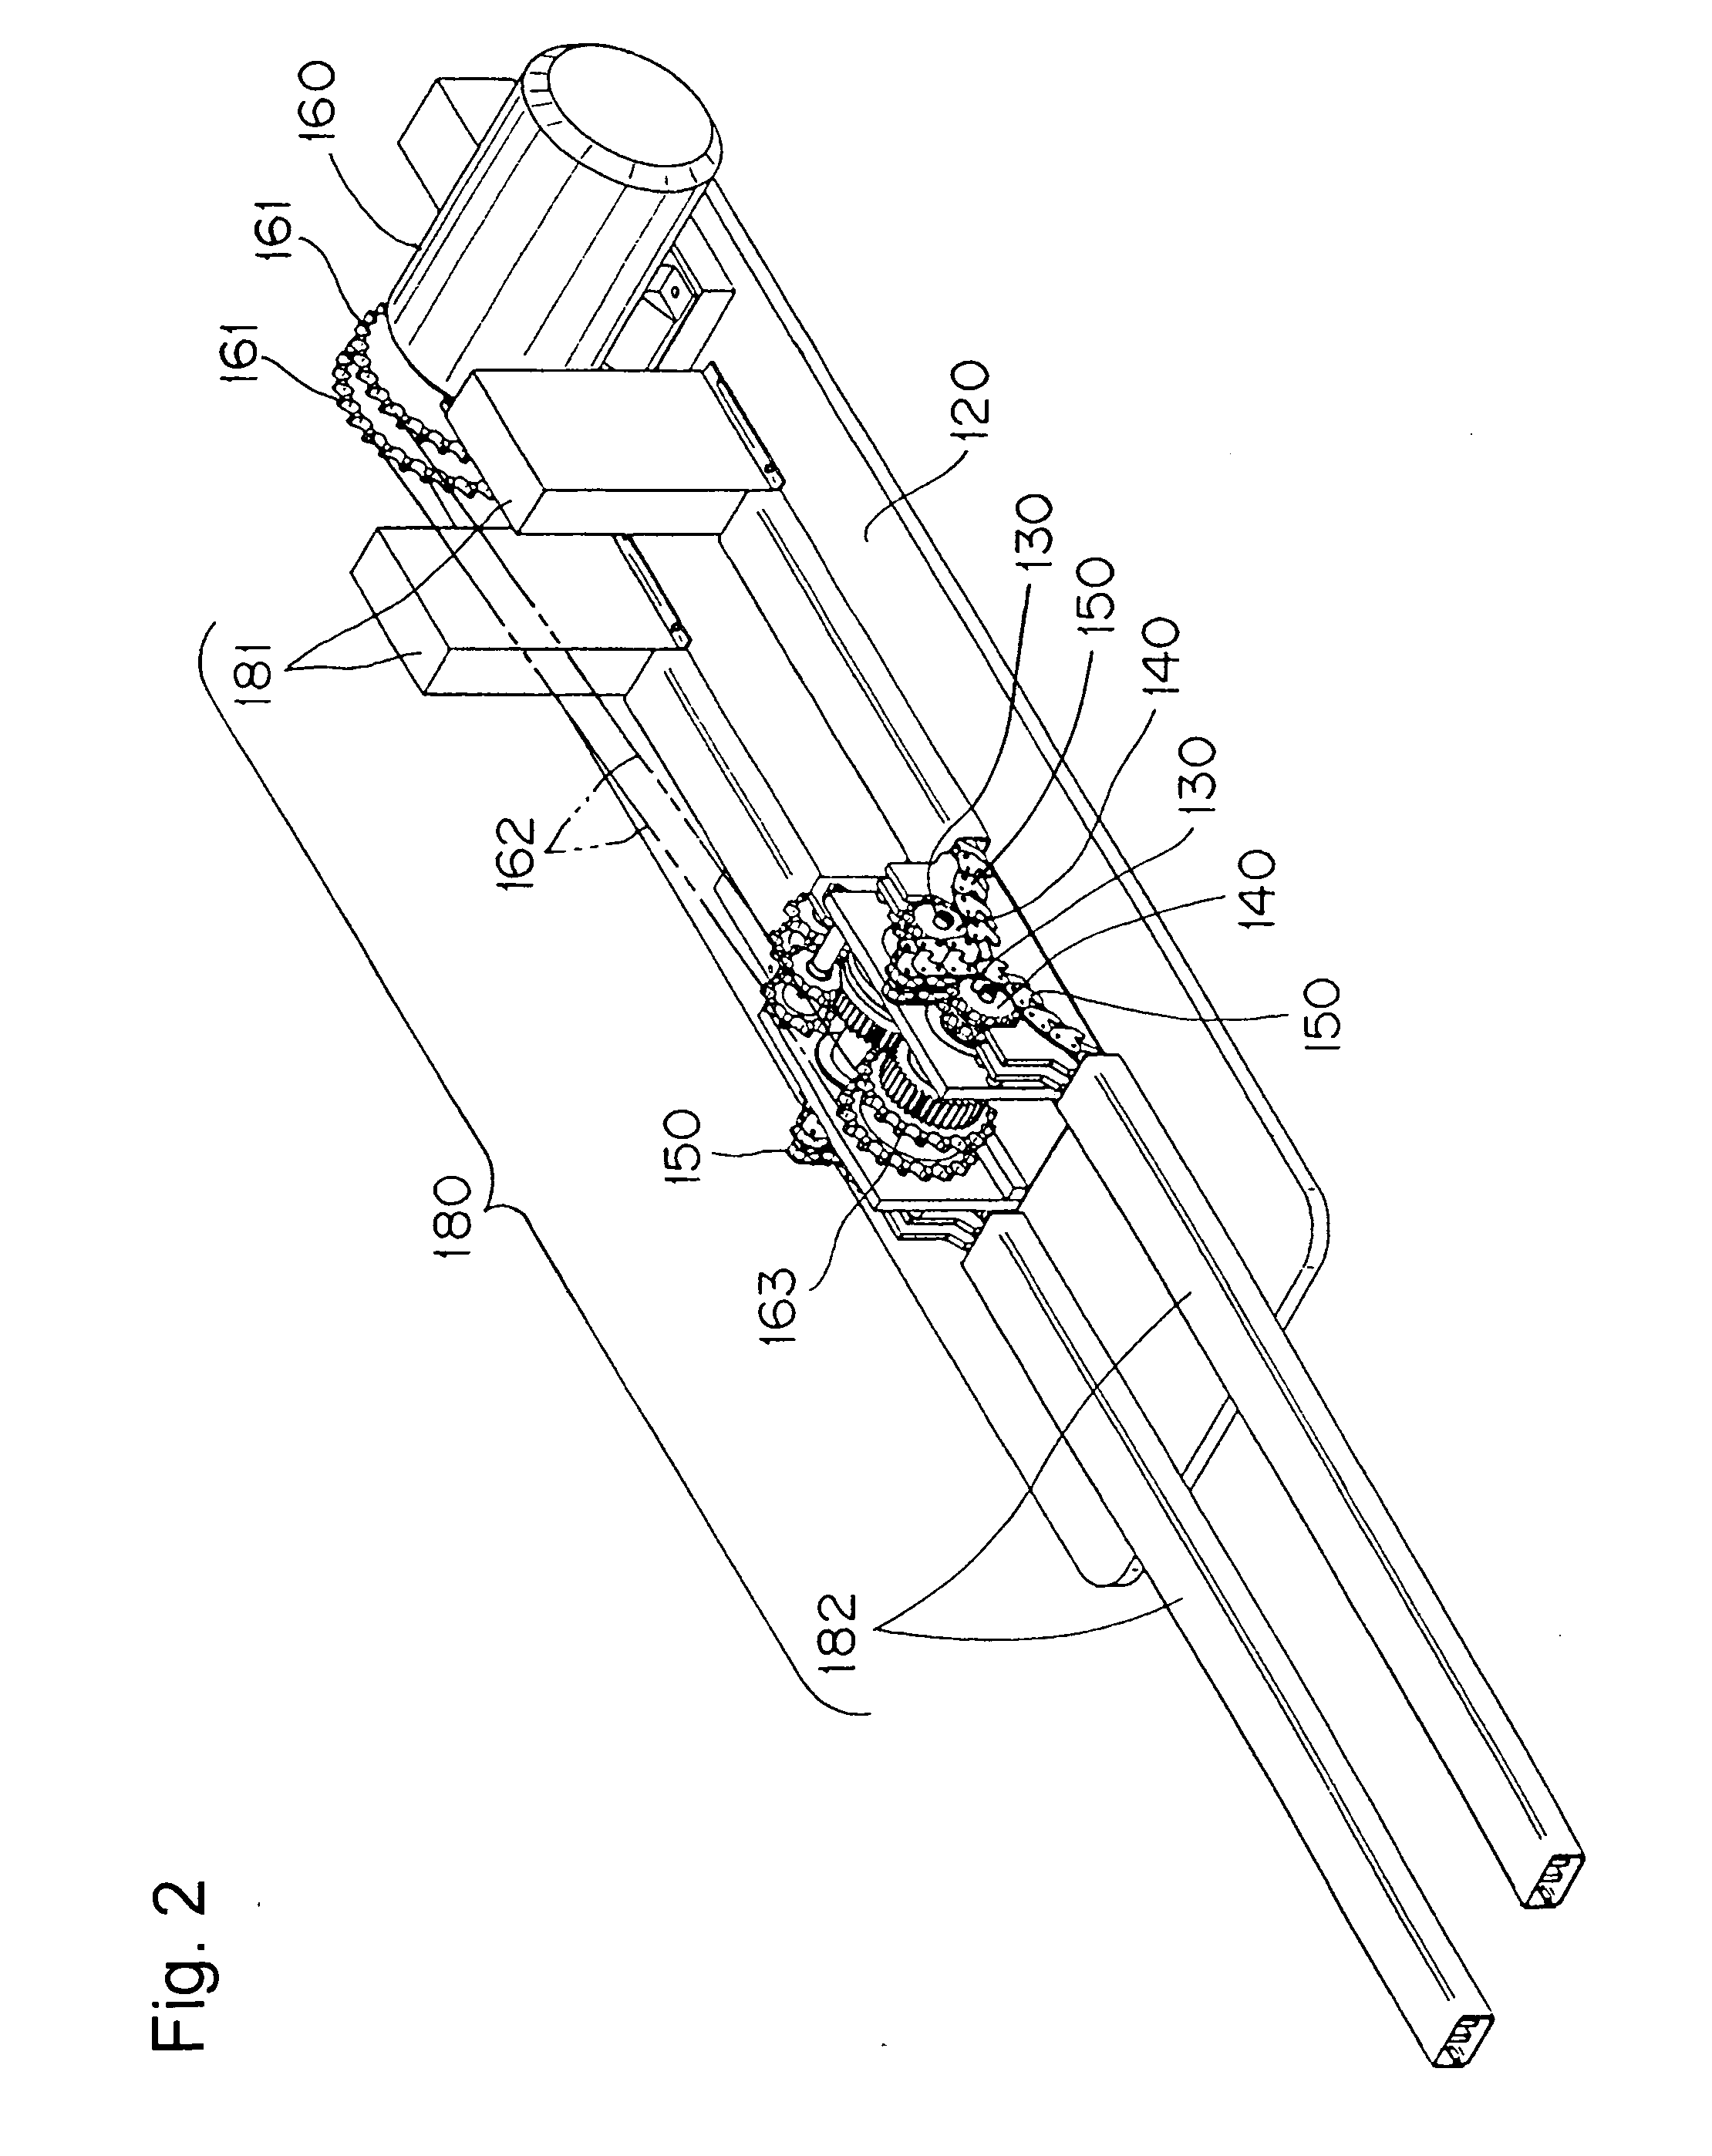 Engagement chain type hoisting and lowering device